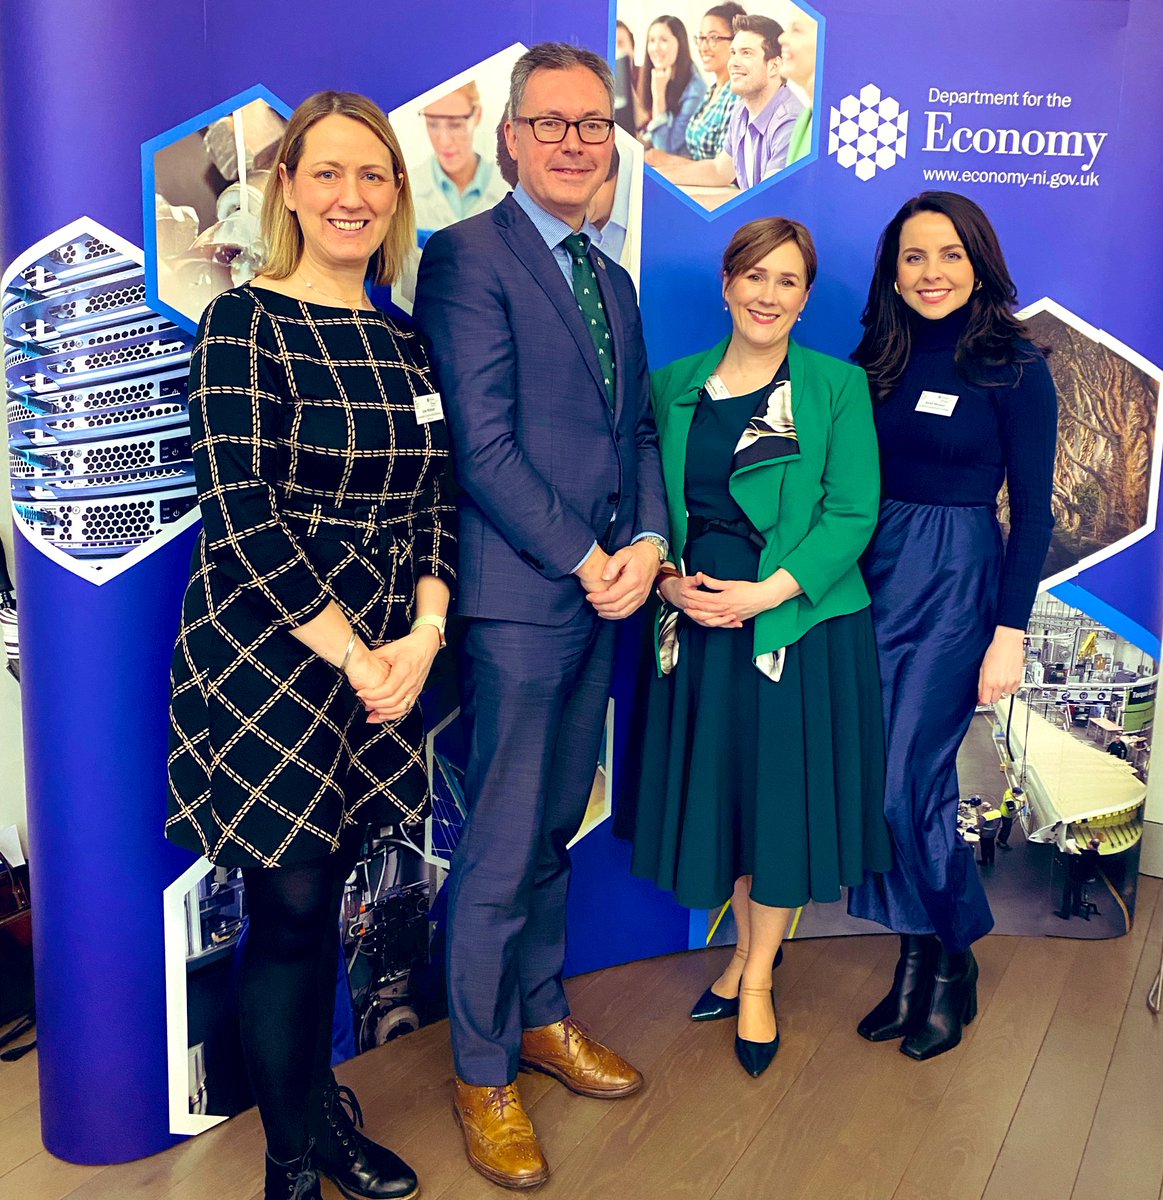 Thank you to @Economy_NI for the invitation to their Skill Up Celebration event. St Mary’s students Lisa Hickson & Sarah Mussen, who are currently taking part in the programme, had the opportunity to share the positive impact on their teaching with Moira Doherty.